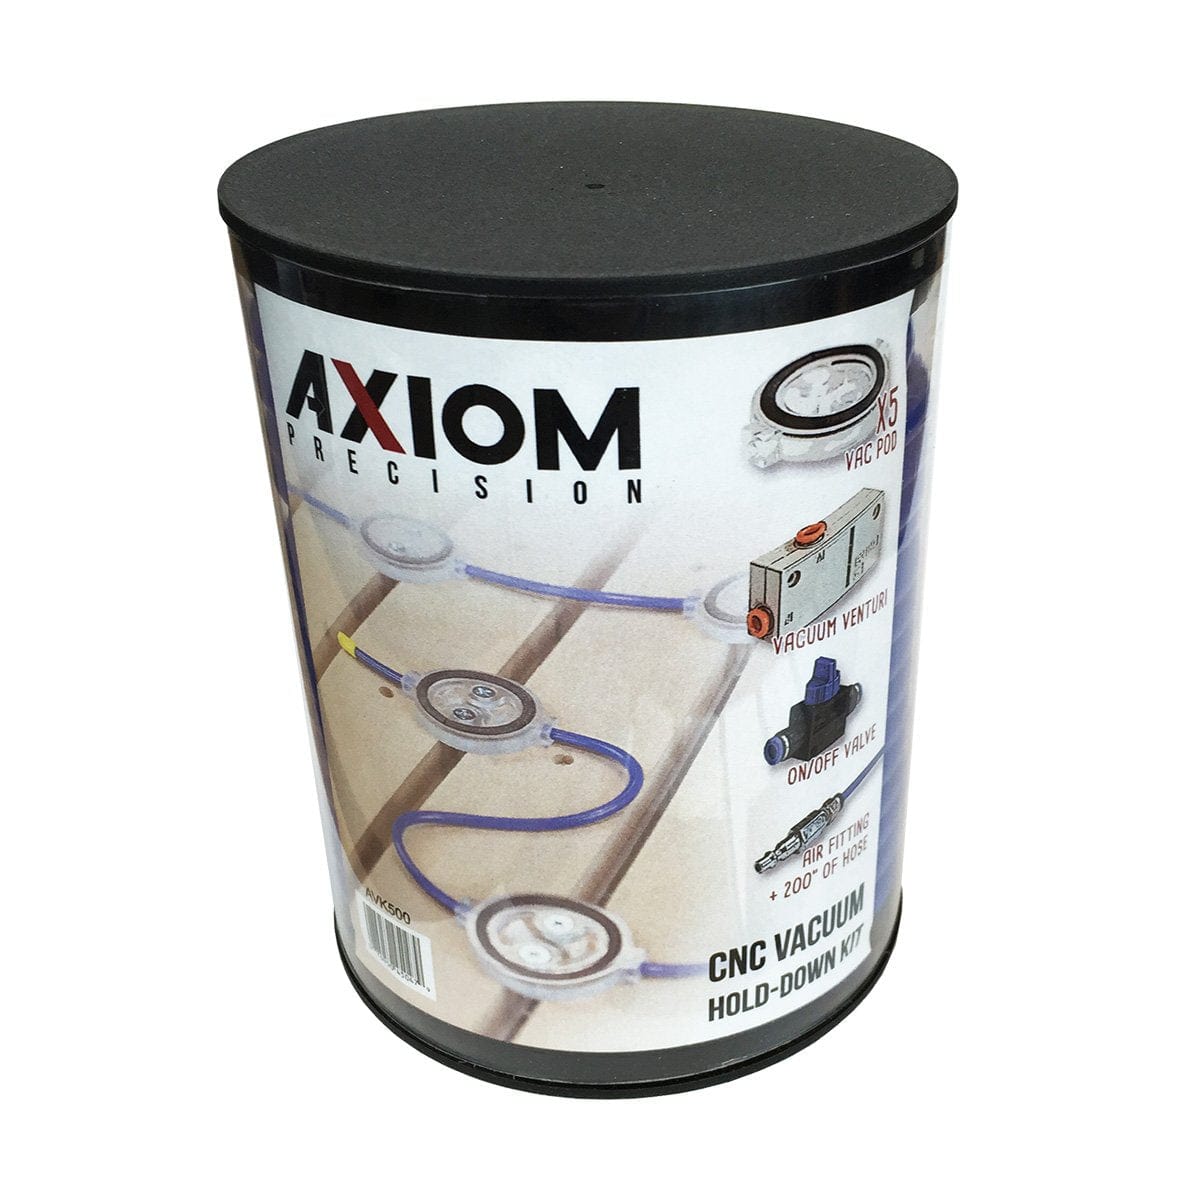 Axiom Precision AVK500 CNC Router Accessory Vacuum Hold-Down Kit